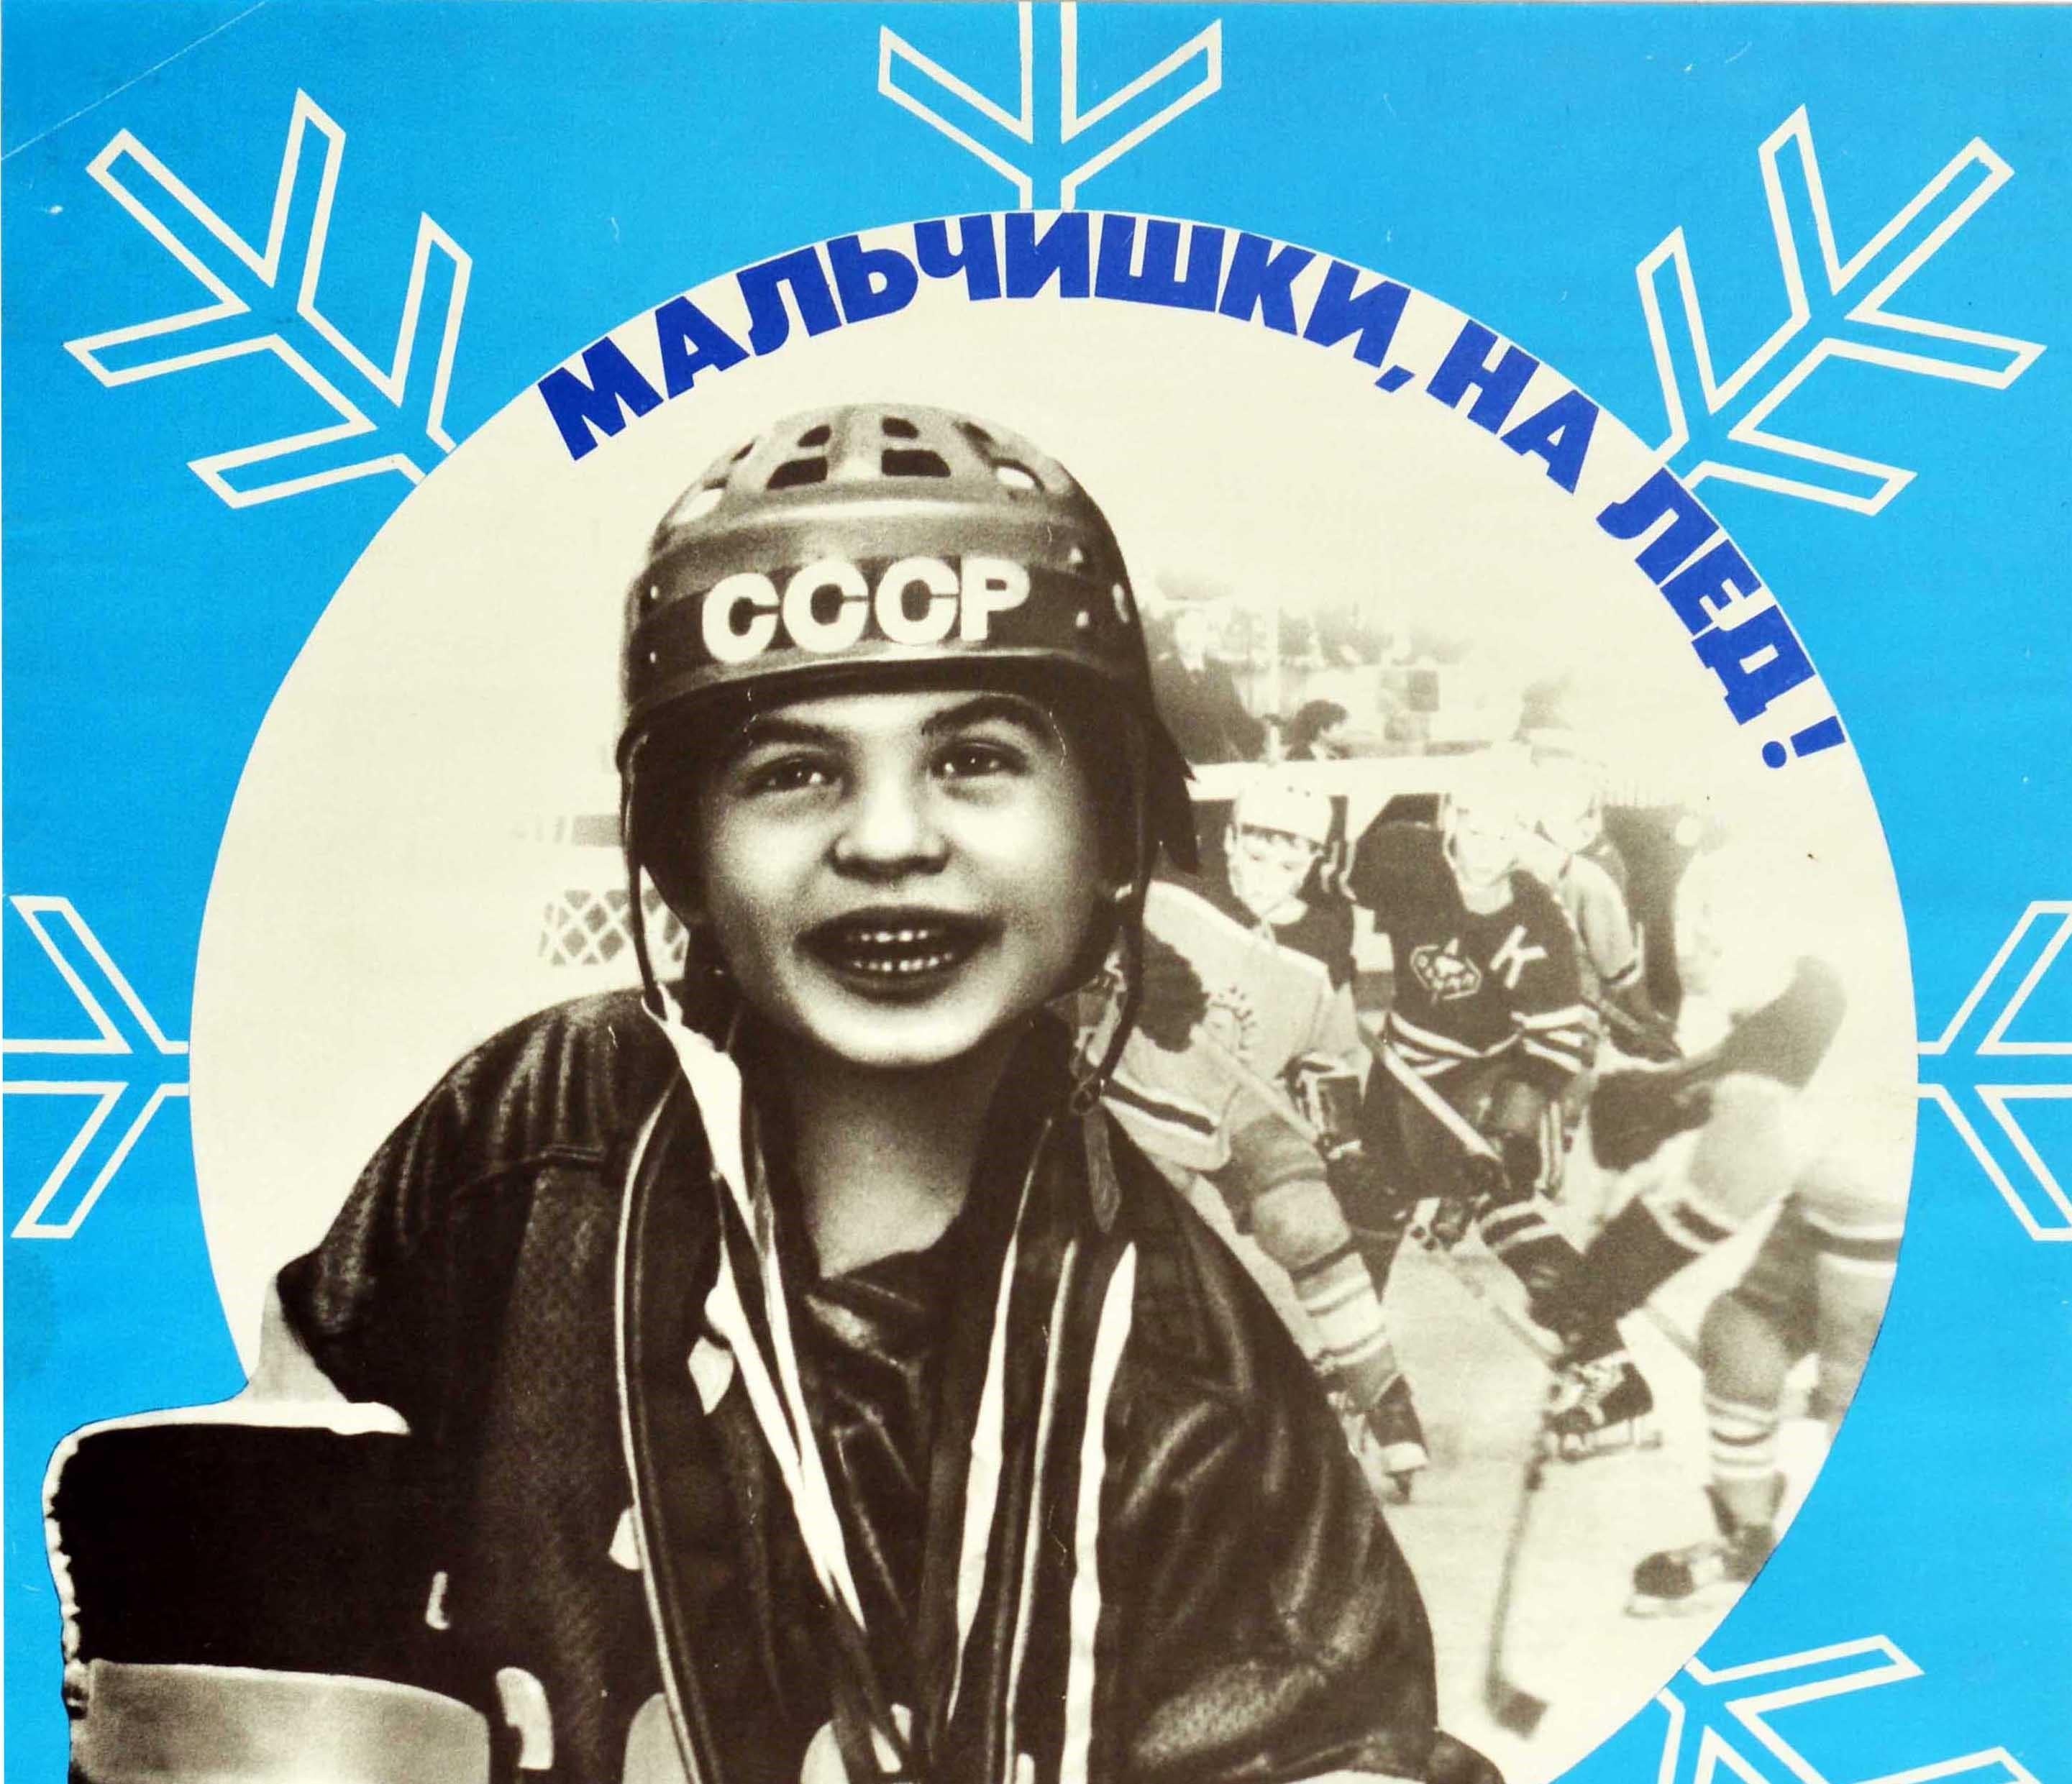 Original vintage Soviet sport propaganda poster - Boys, get on the ice! / Мальчишки на лед! - featuring a black and white photograph of a smiling young boy wearing ice hockey kit and holding a hockey stick with CCCP USSR on his helmet and gold